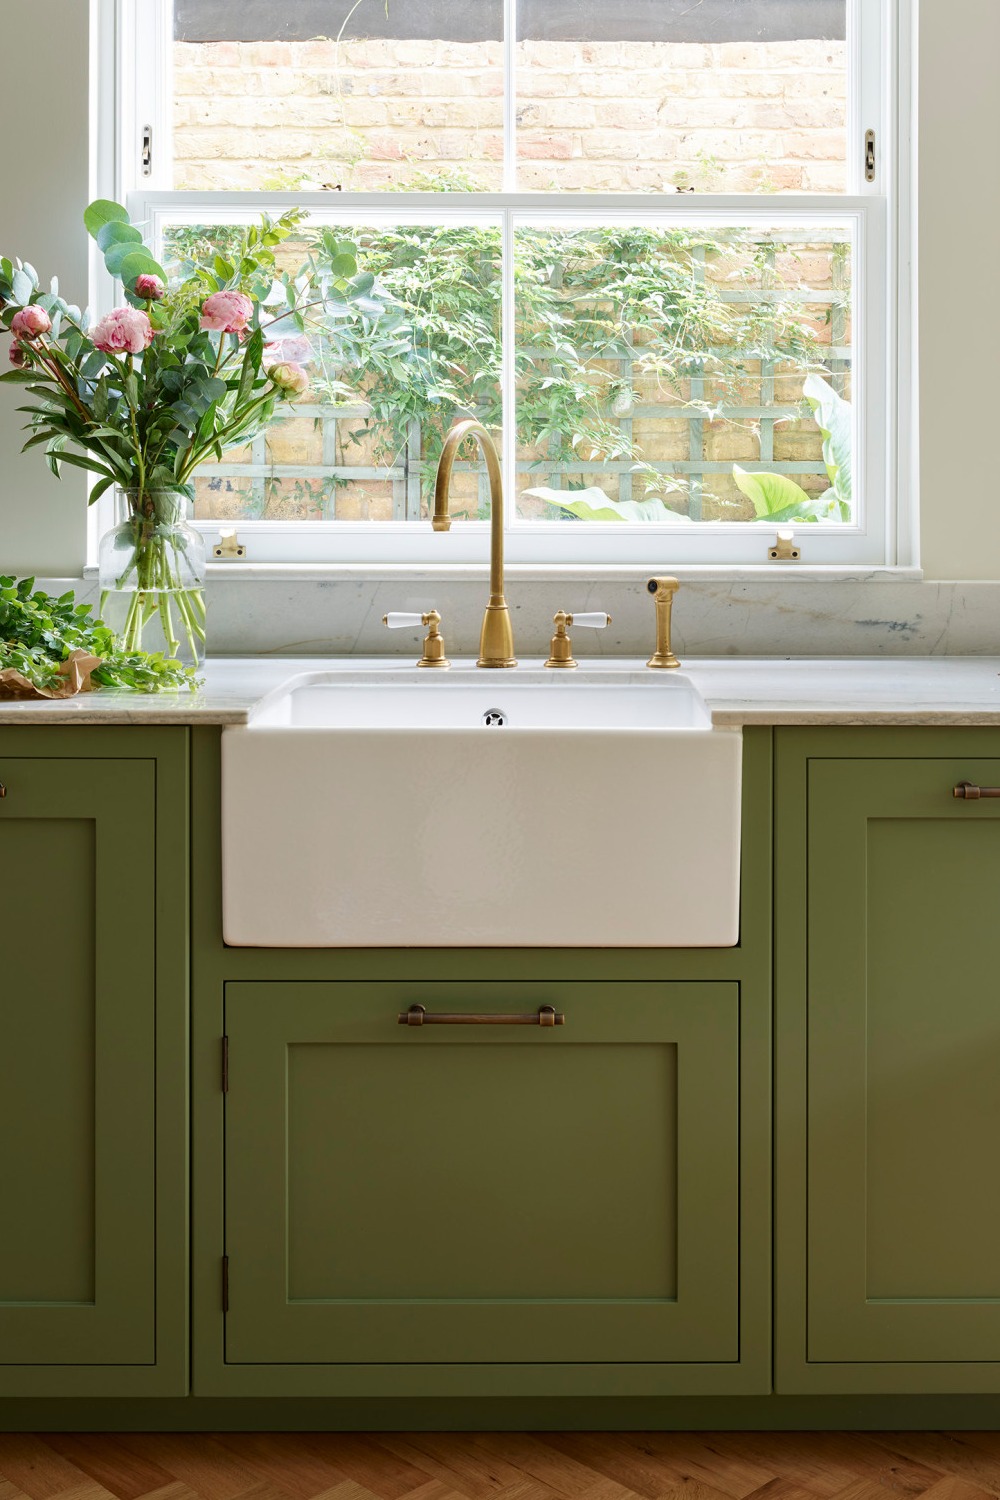 Green Cabinets Farmhouse Kitchen Sink Cart Add White Countertops Wood Floor Brass Faucet